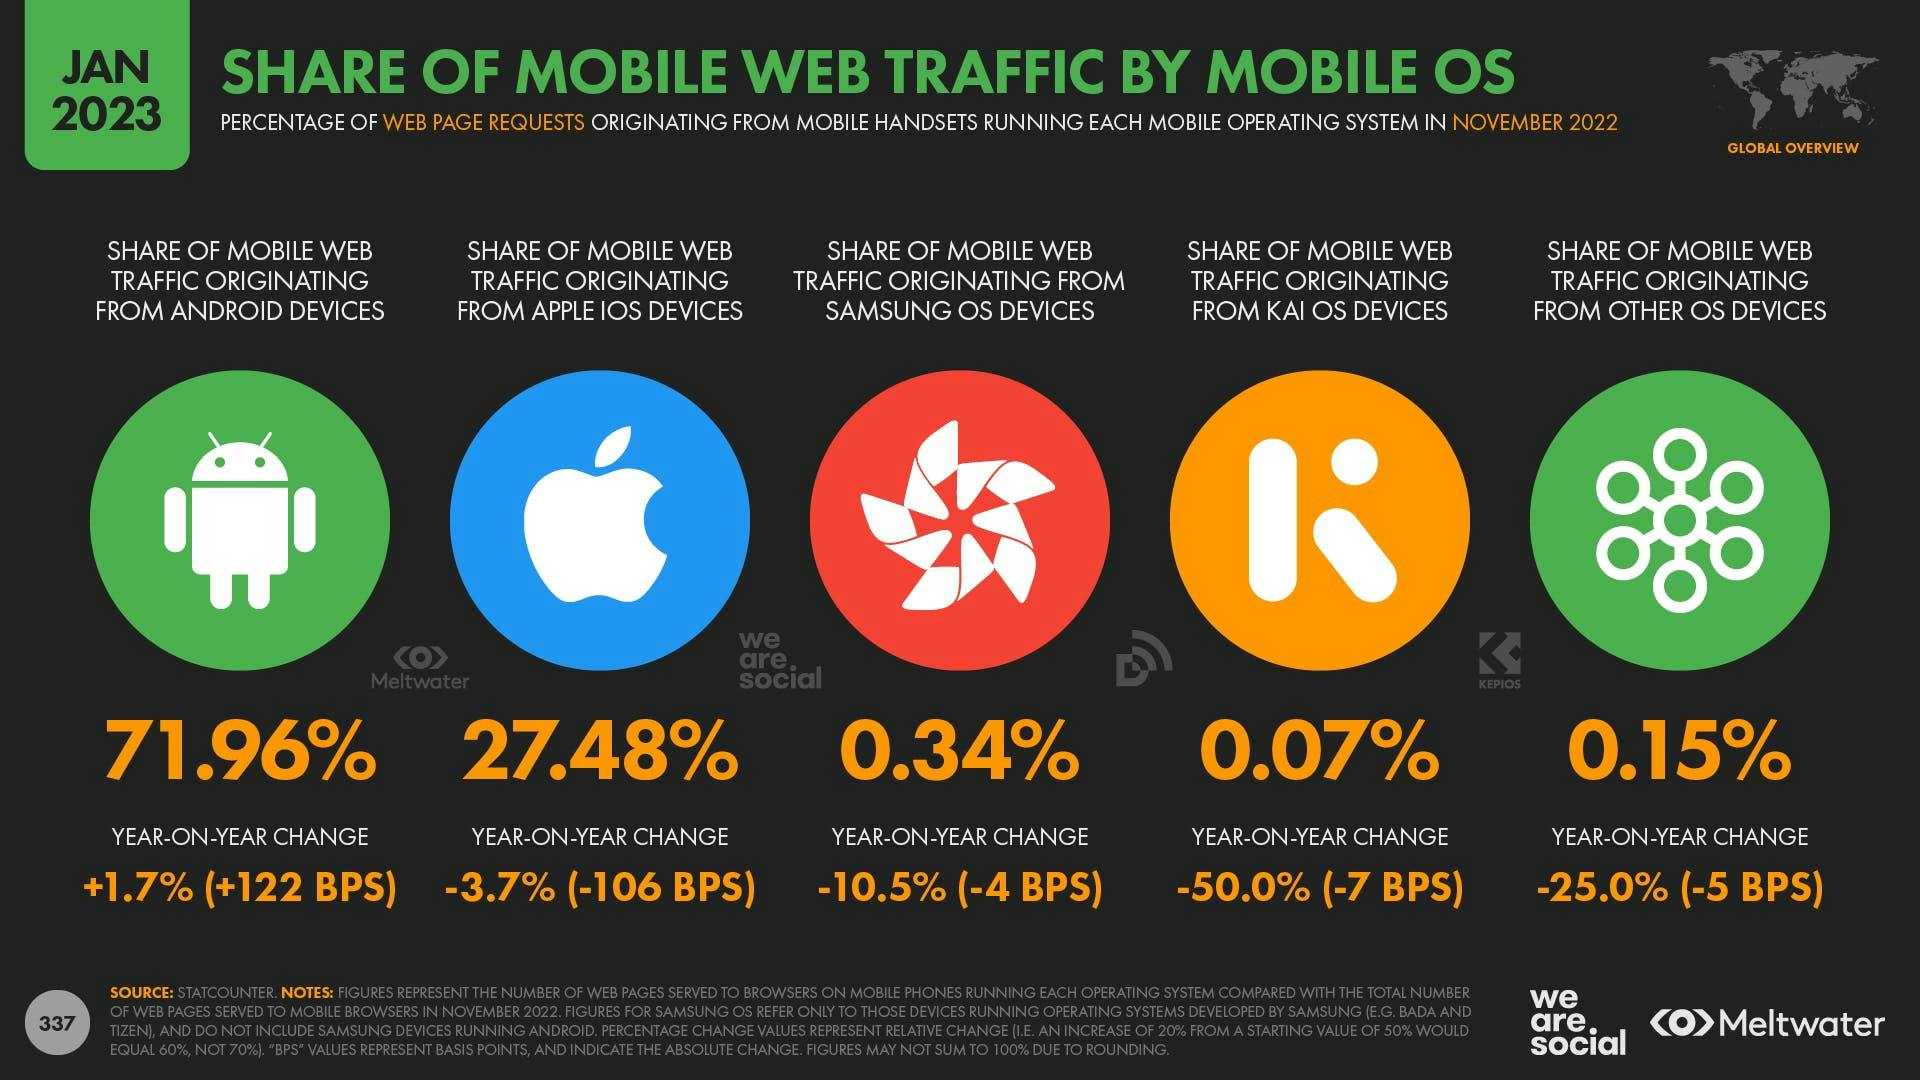 share of mobile web traffic by mobile OS 2023